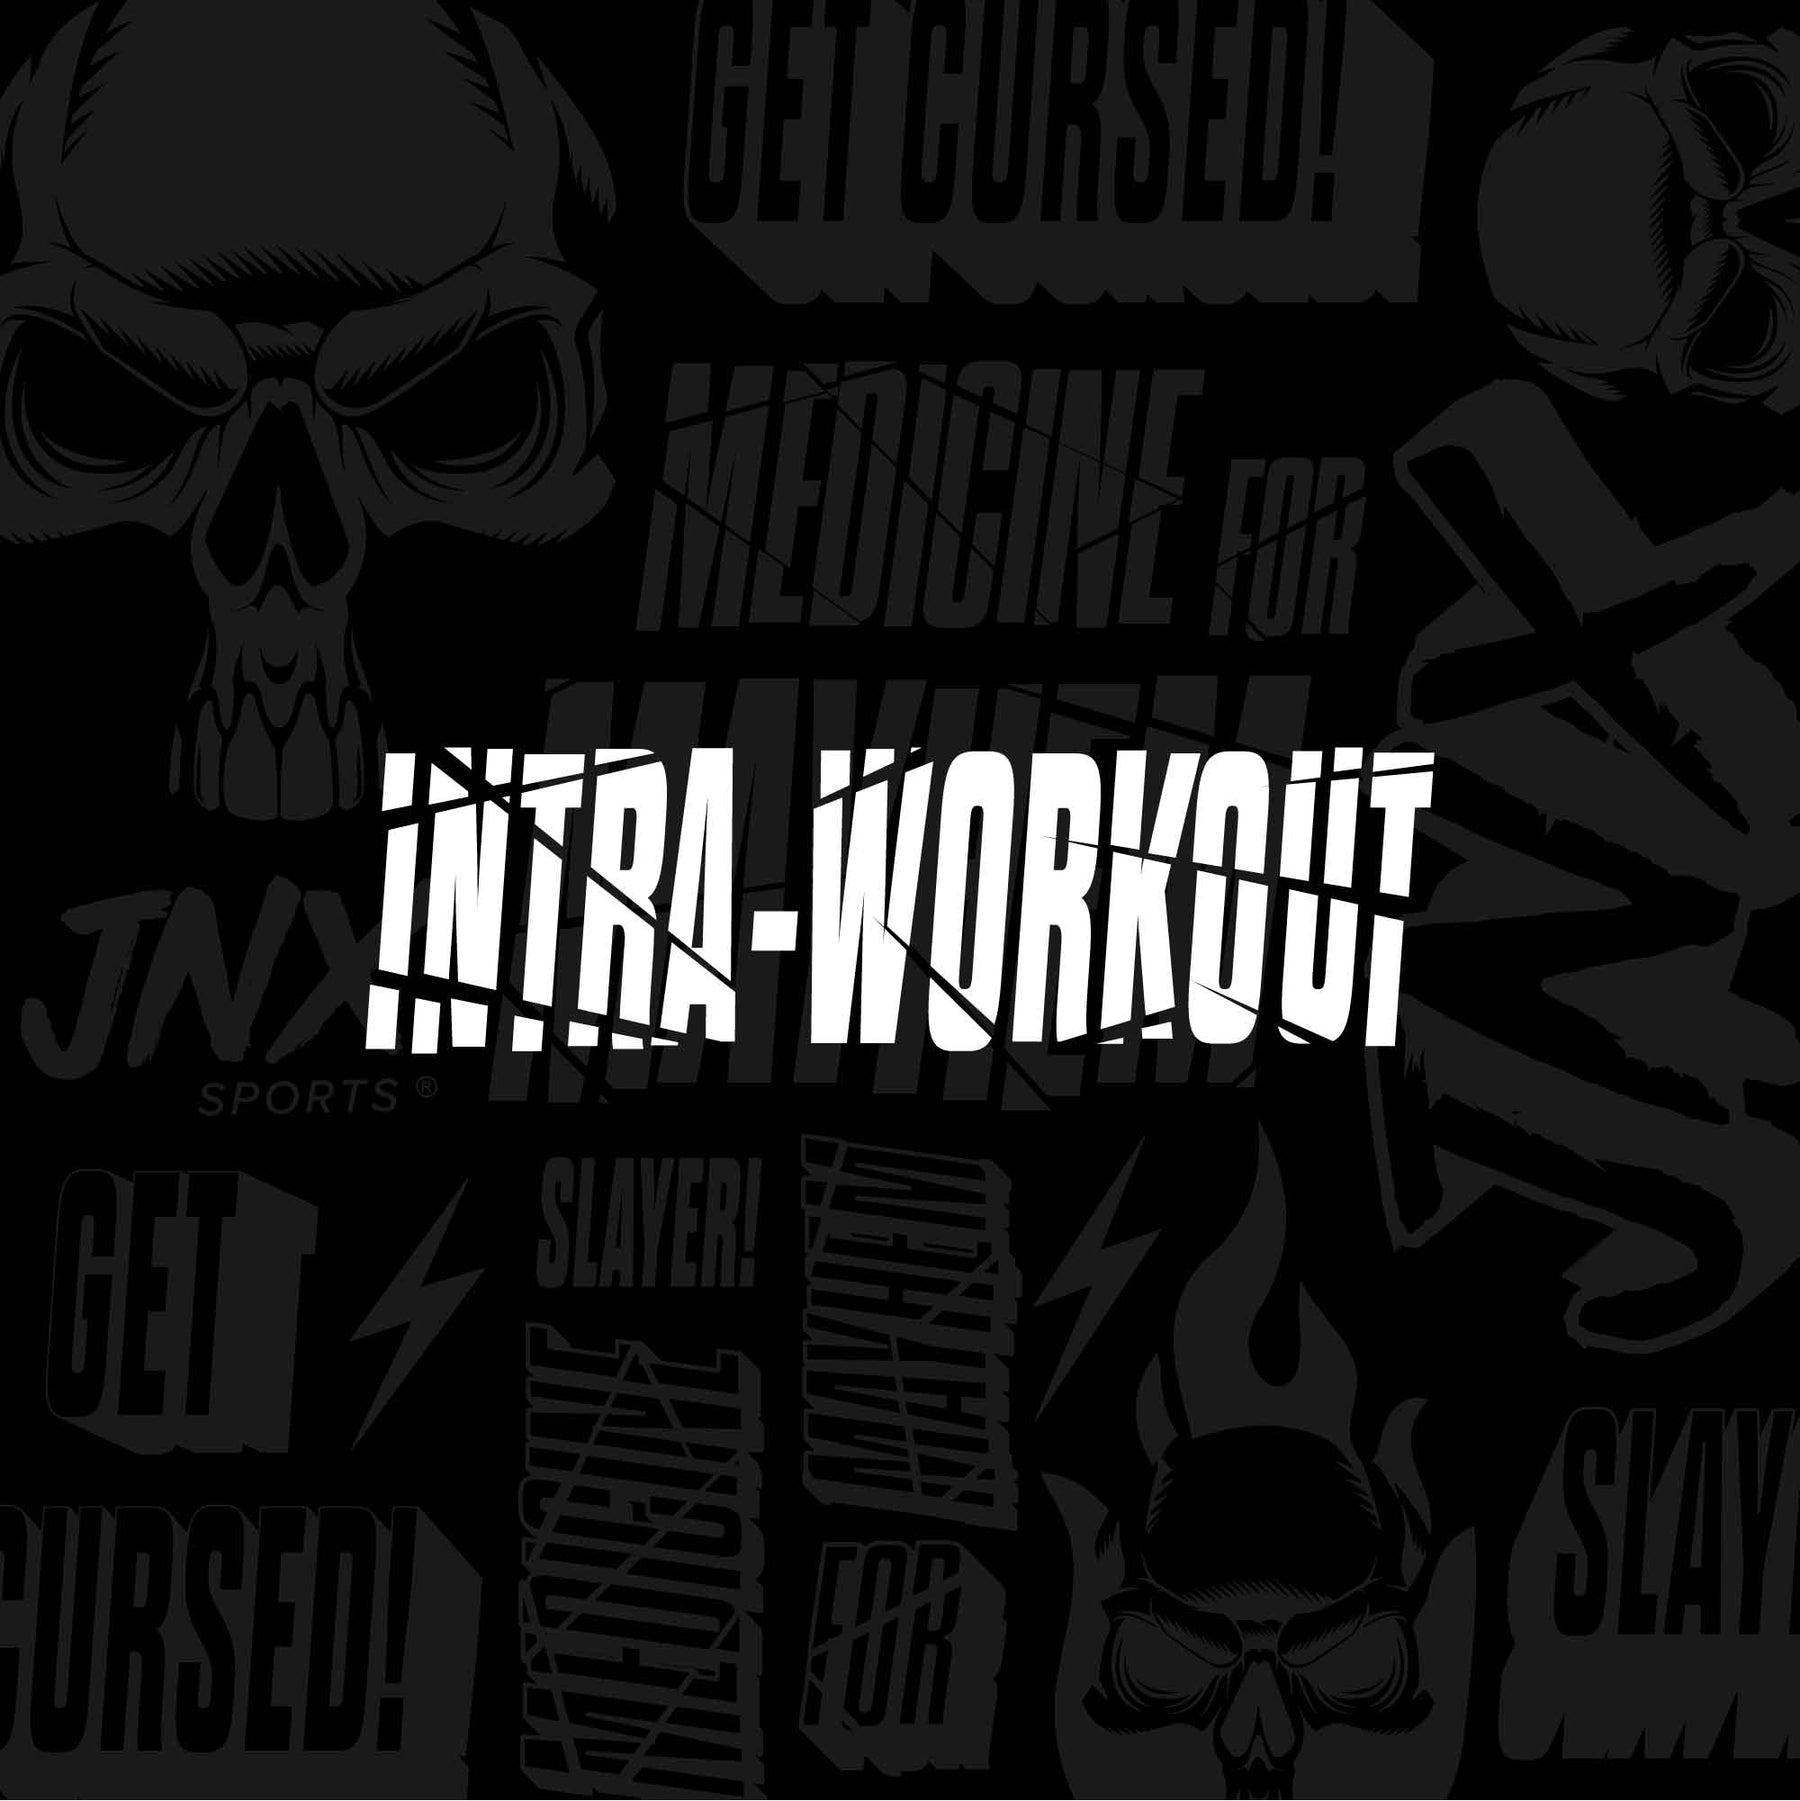 INTRA-WORKOUT